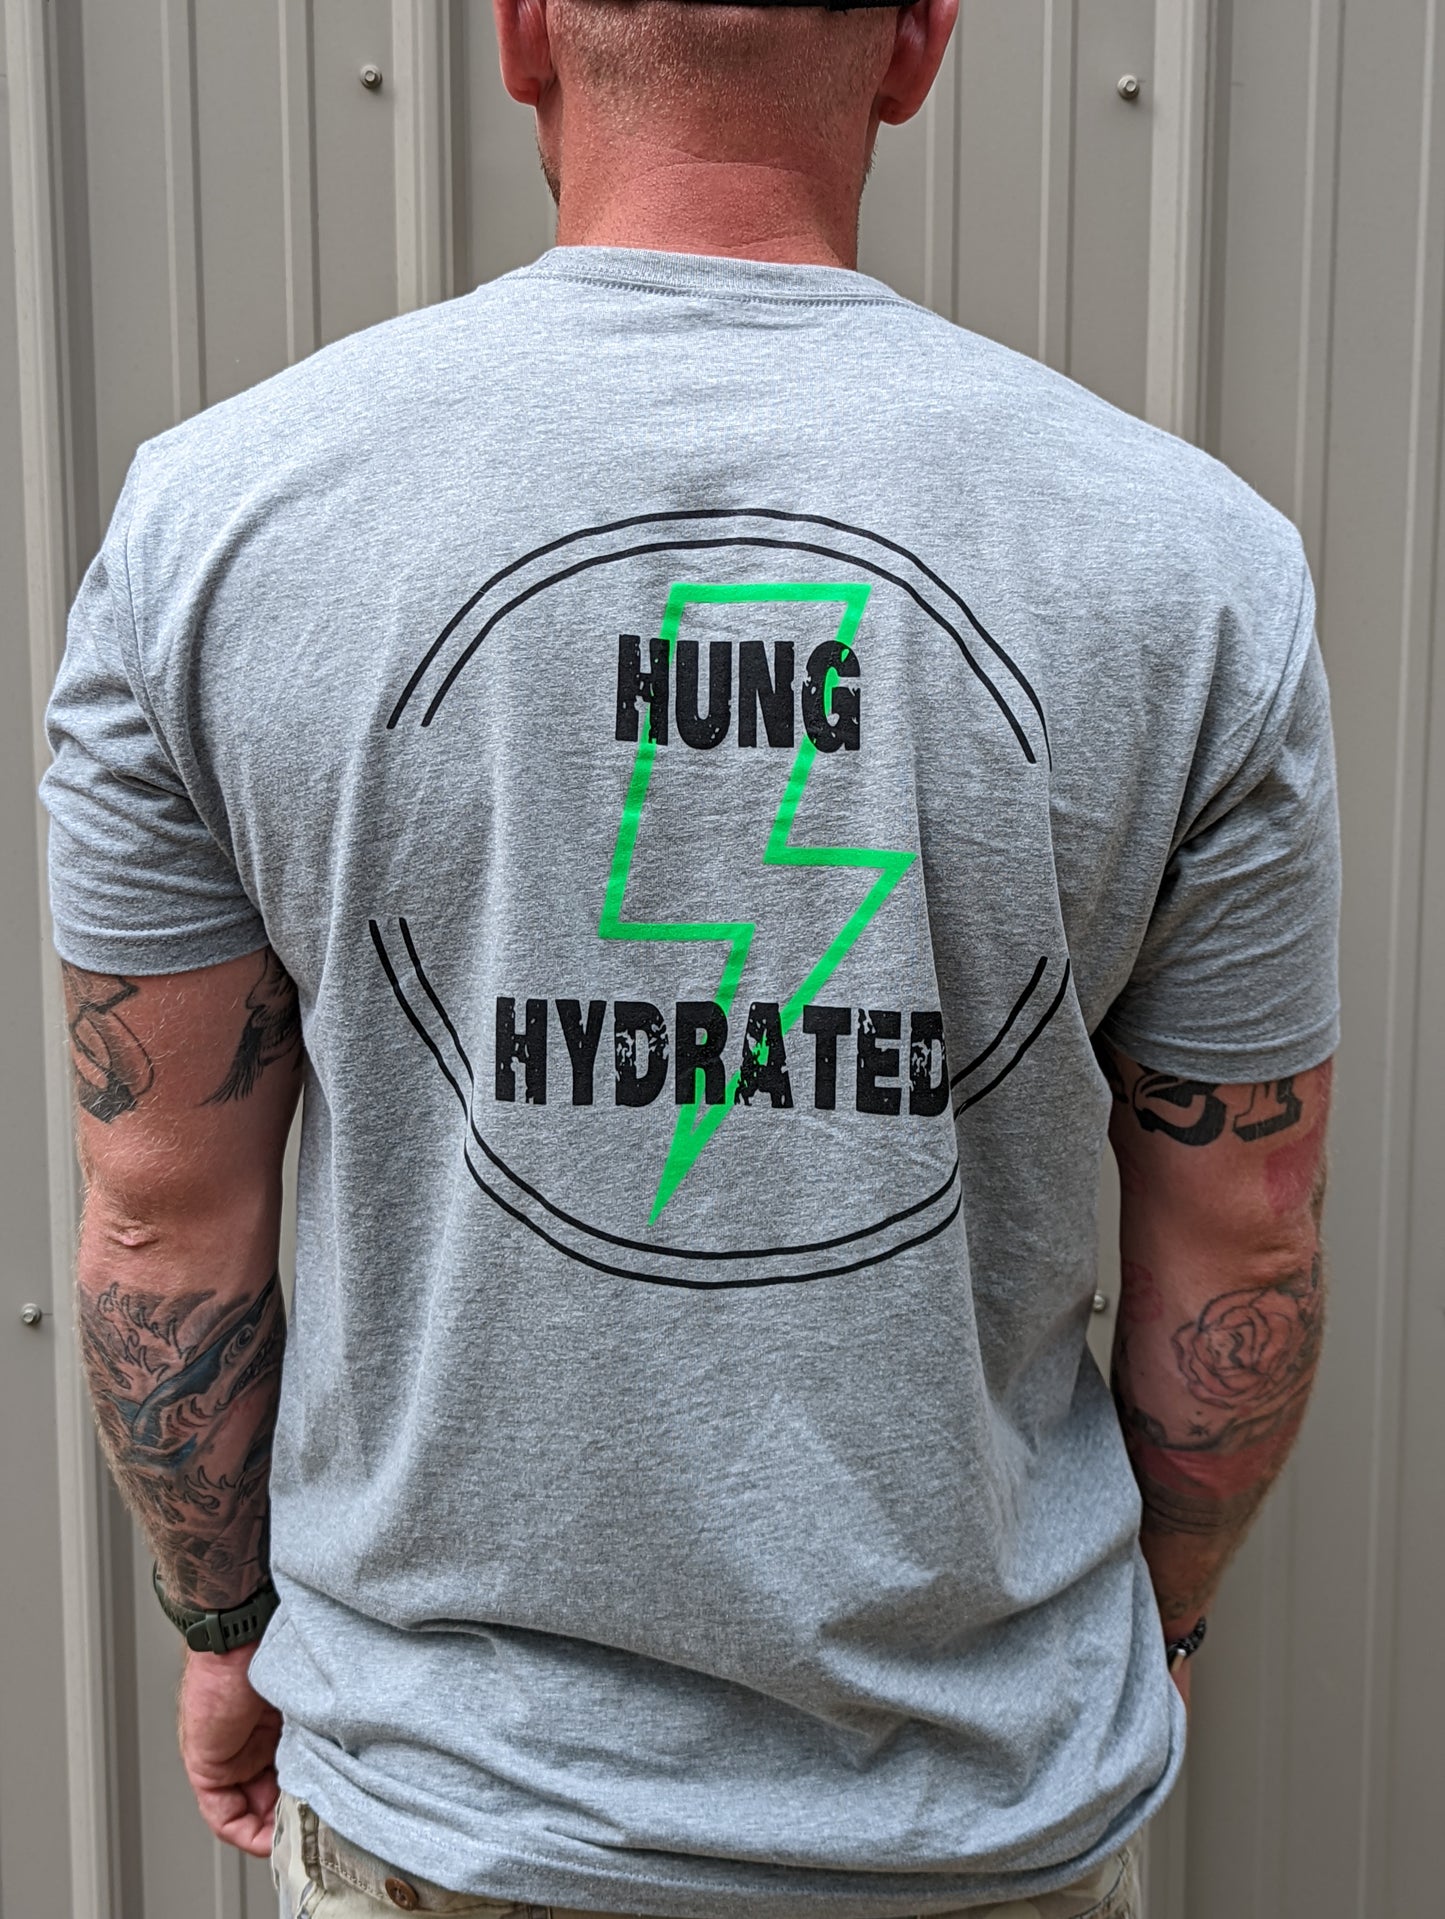 Hung and Hydrated Shirts